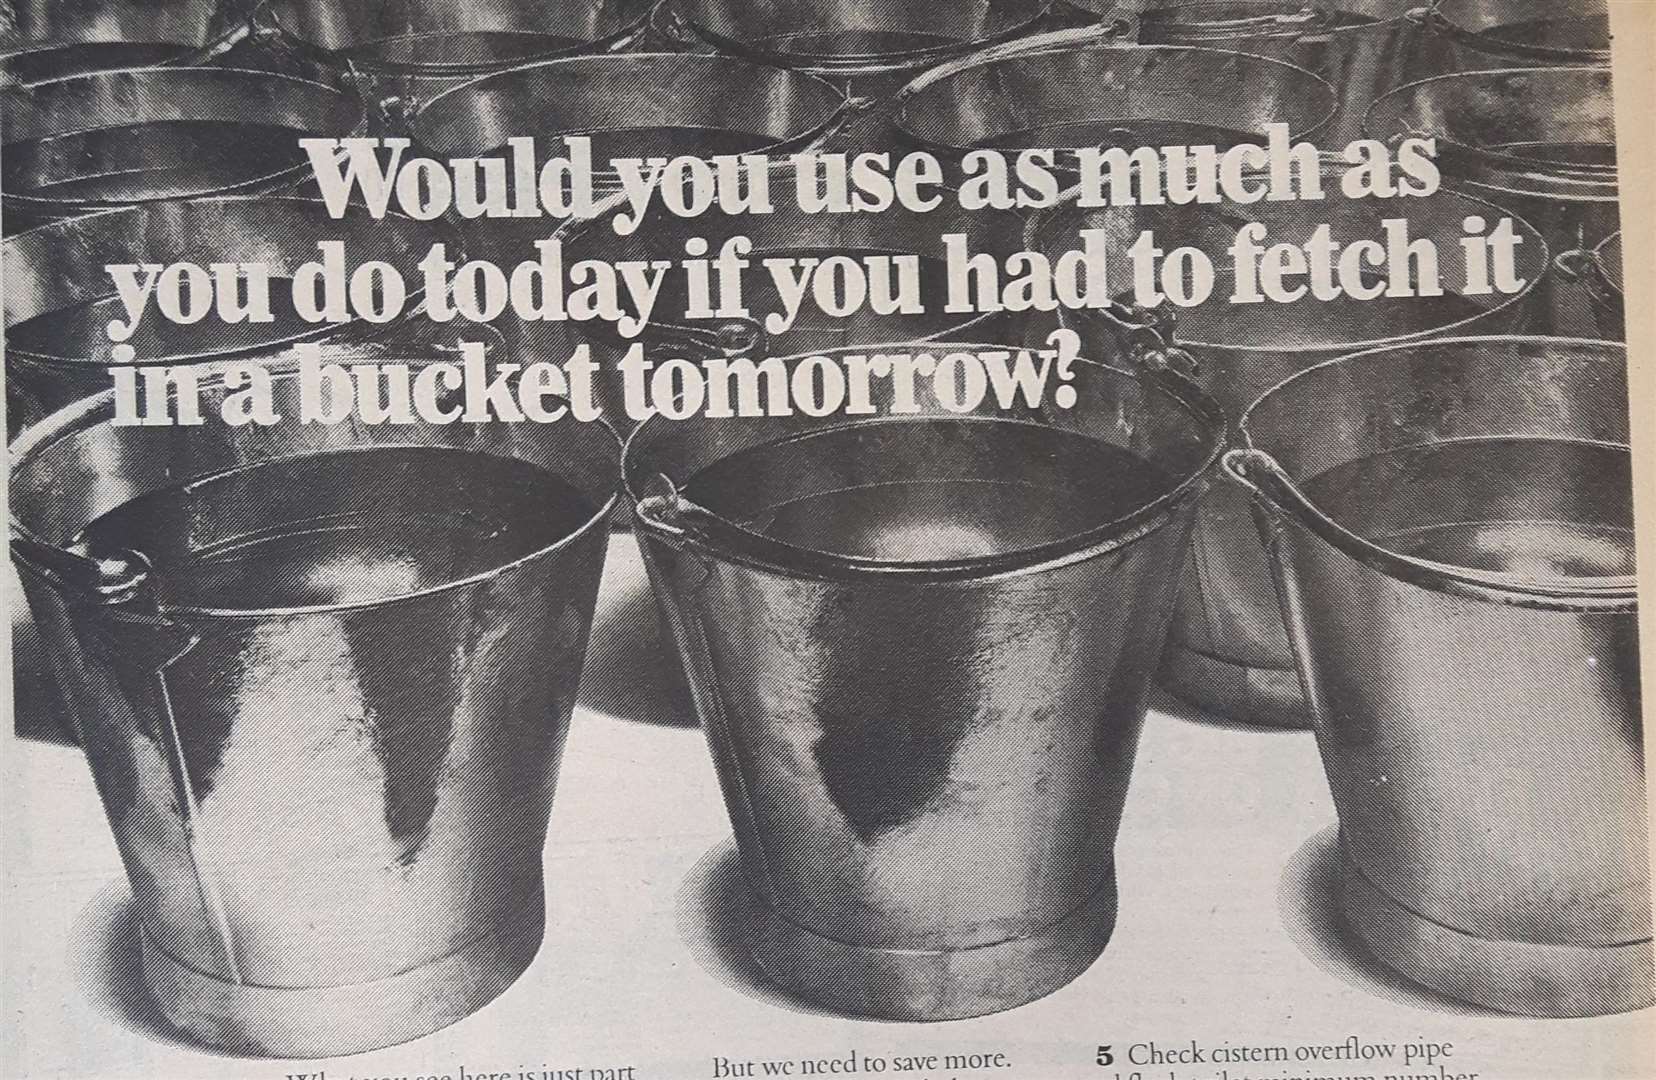 A cutting from the Kentish Gazette in July 1976. Southern Water authority advert due to the drought